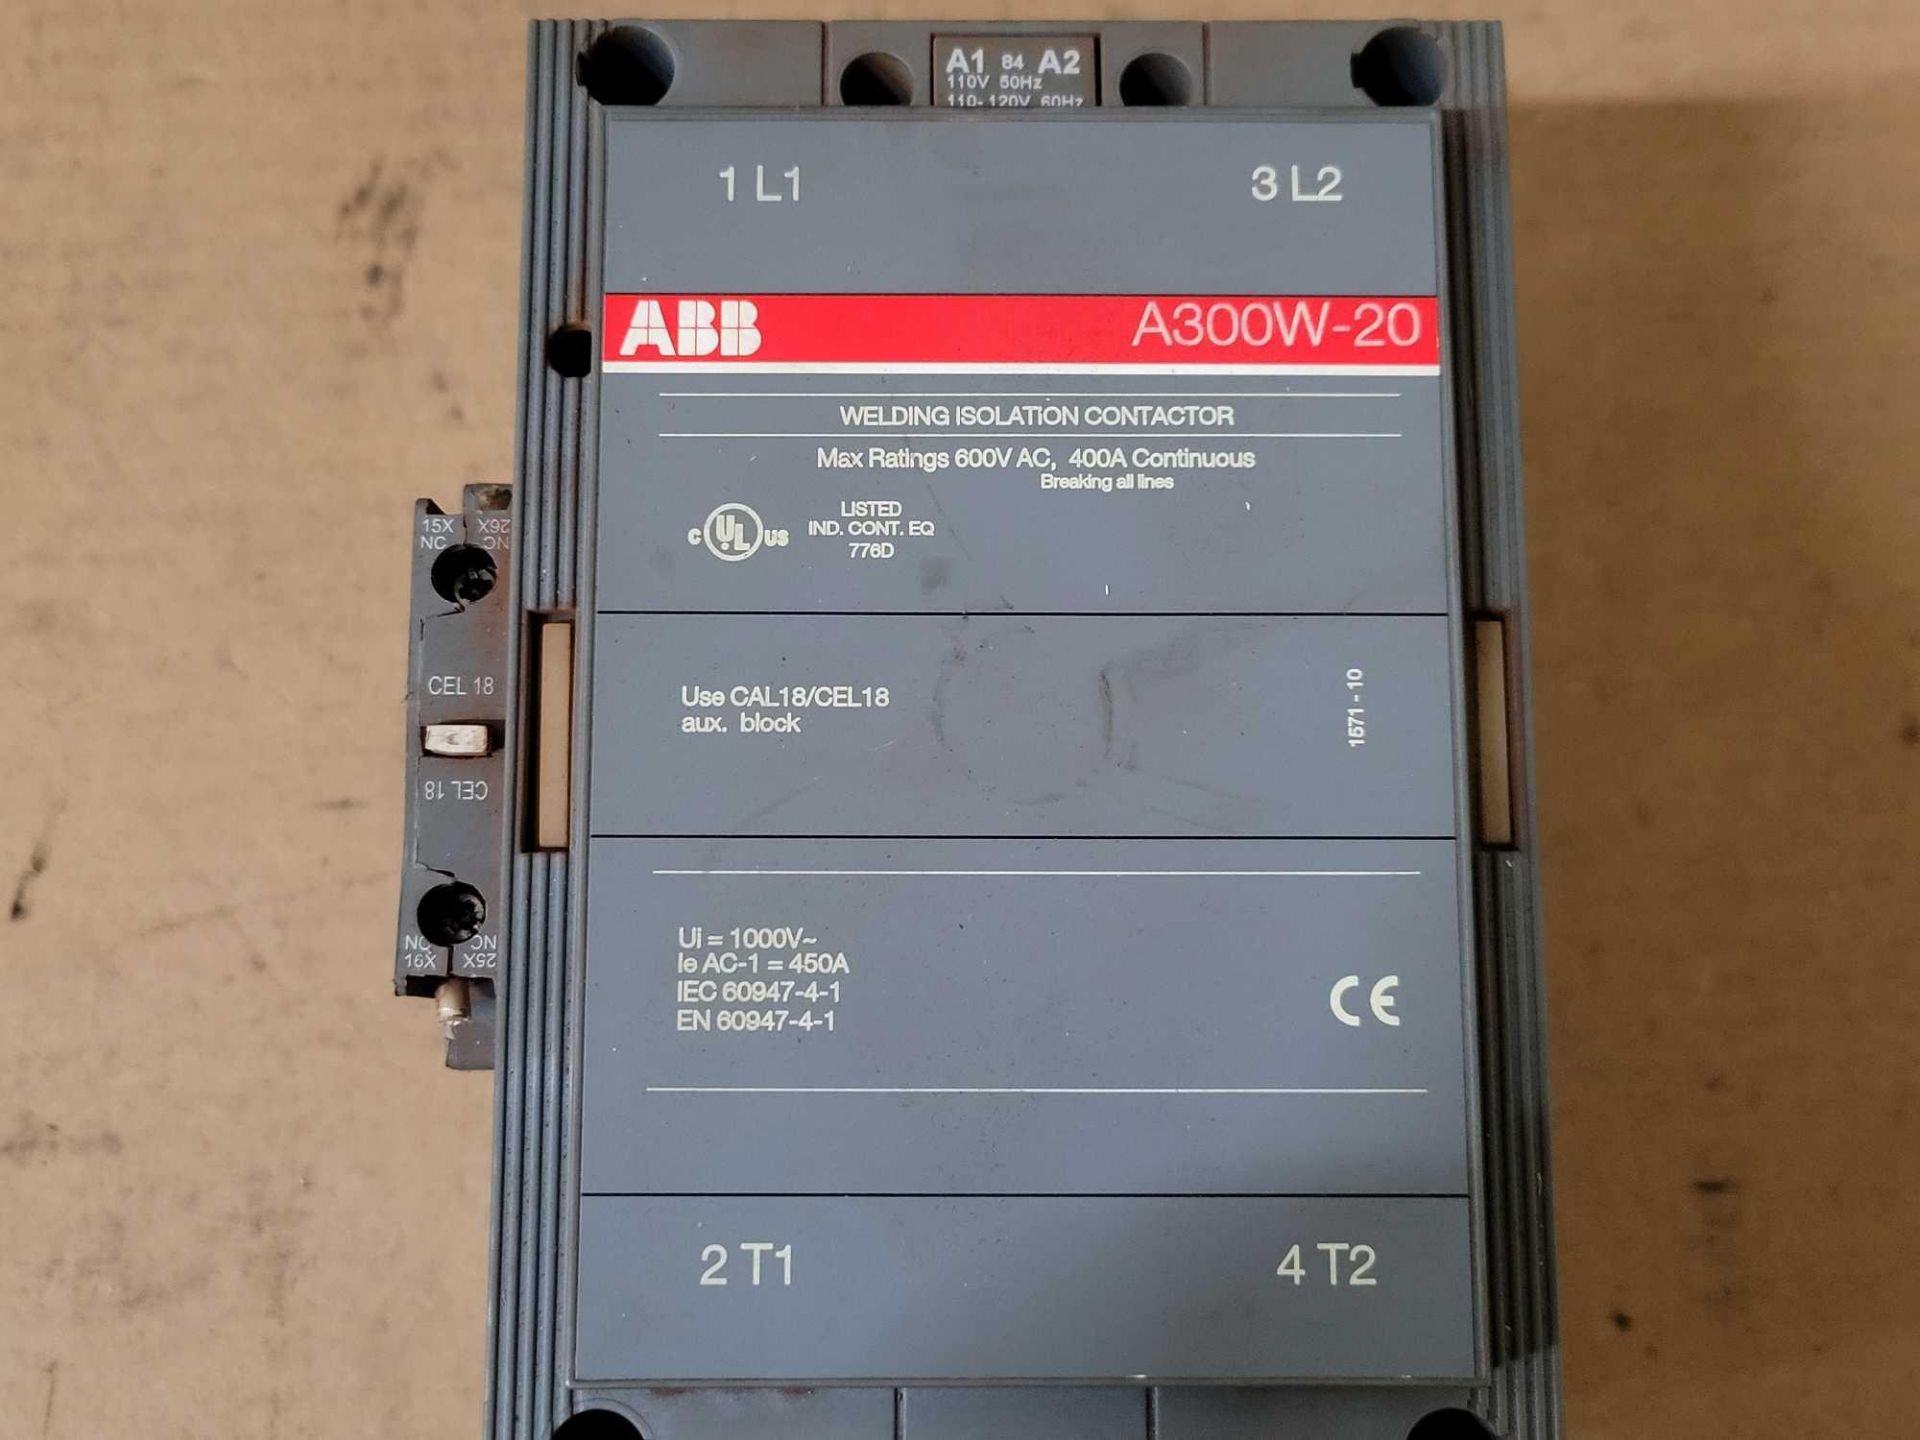 LOT OF 2 ABB A300W-20 WELDING ISOLATION CONTACTOR - Image 3 of 5